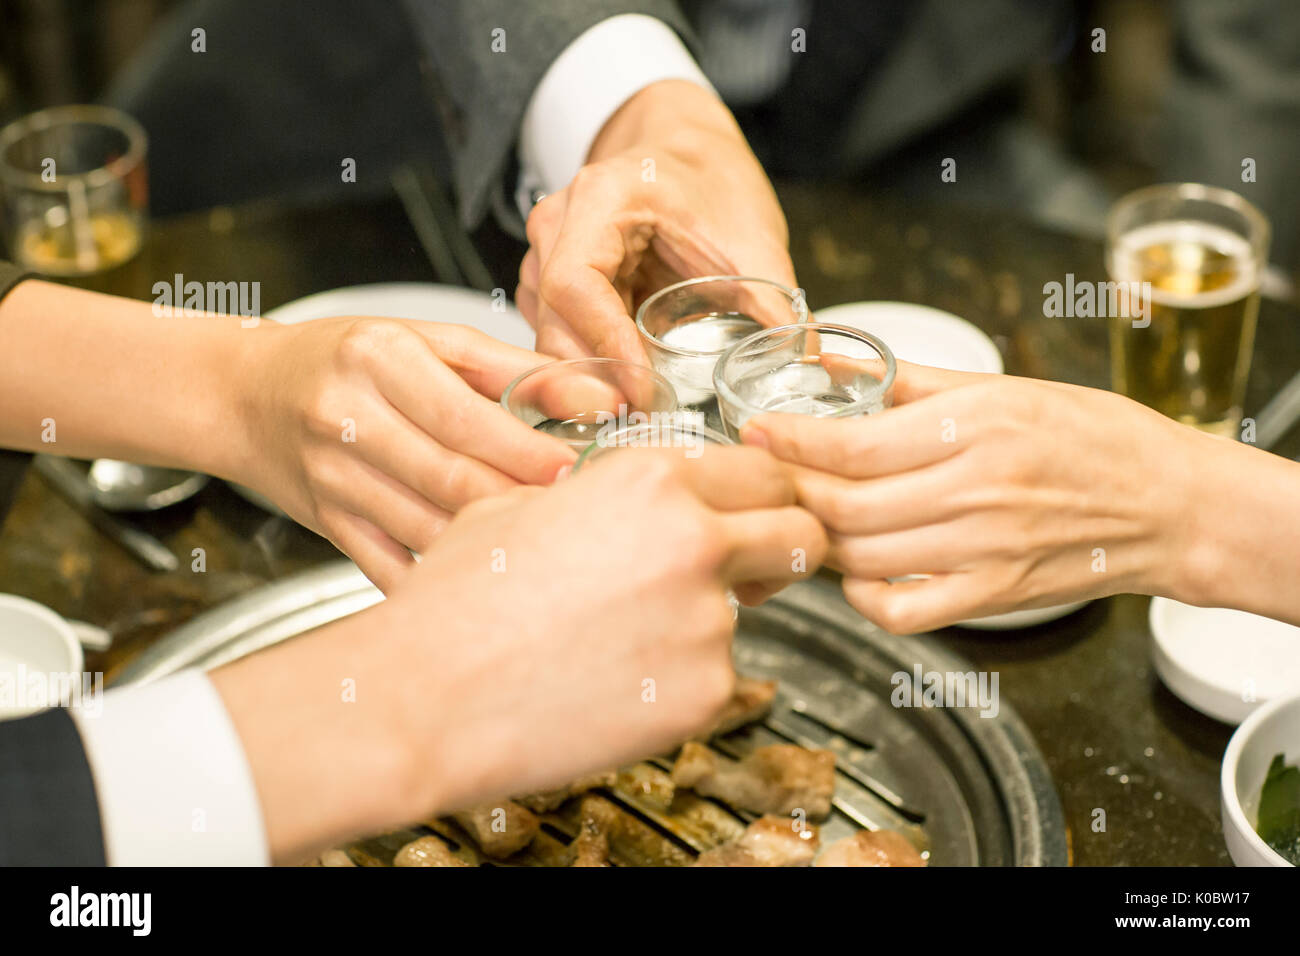 Coworkers toasting at get-together Stock Photo